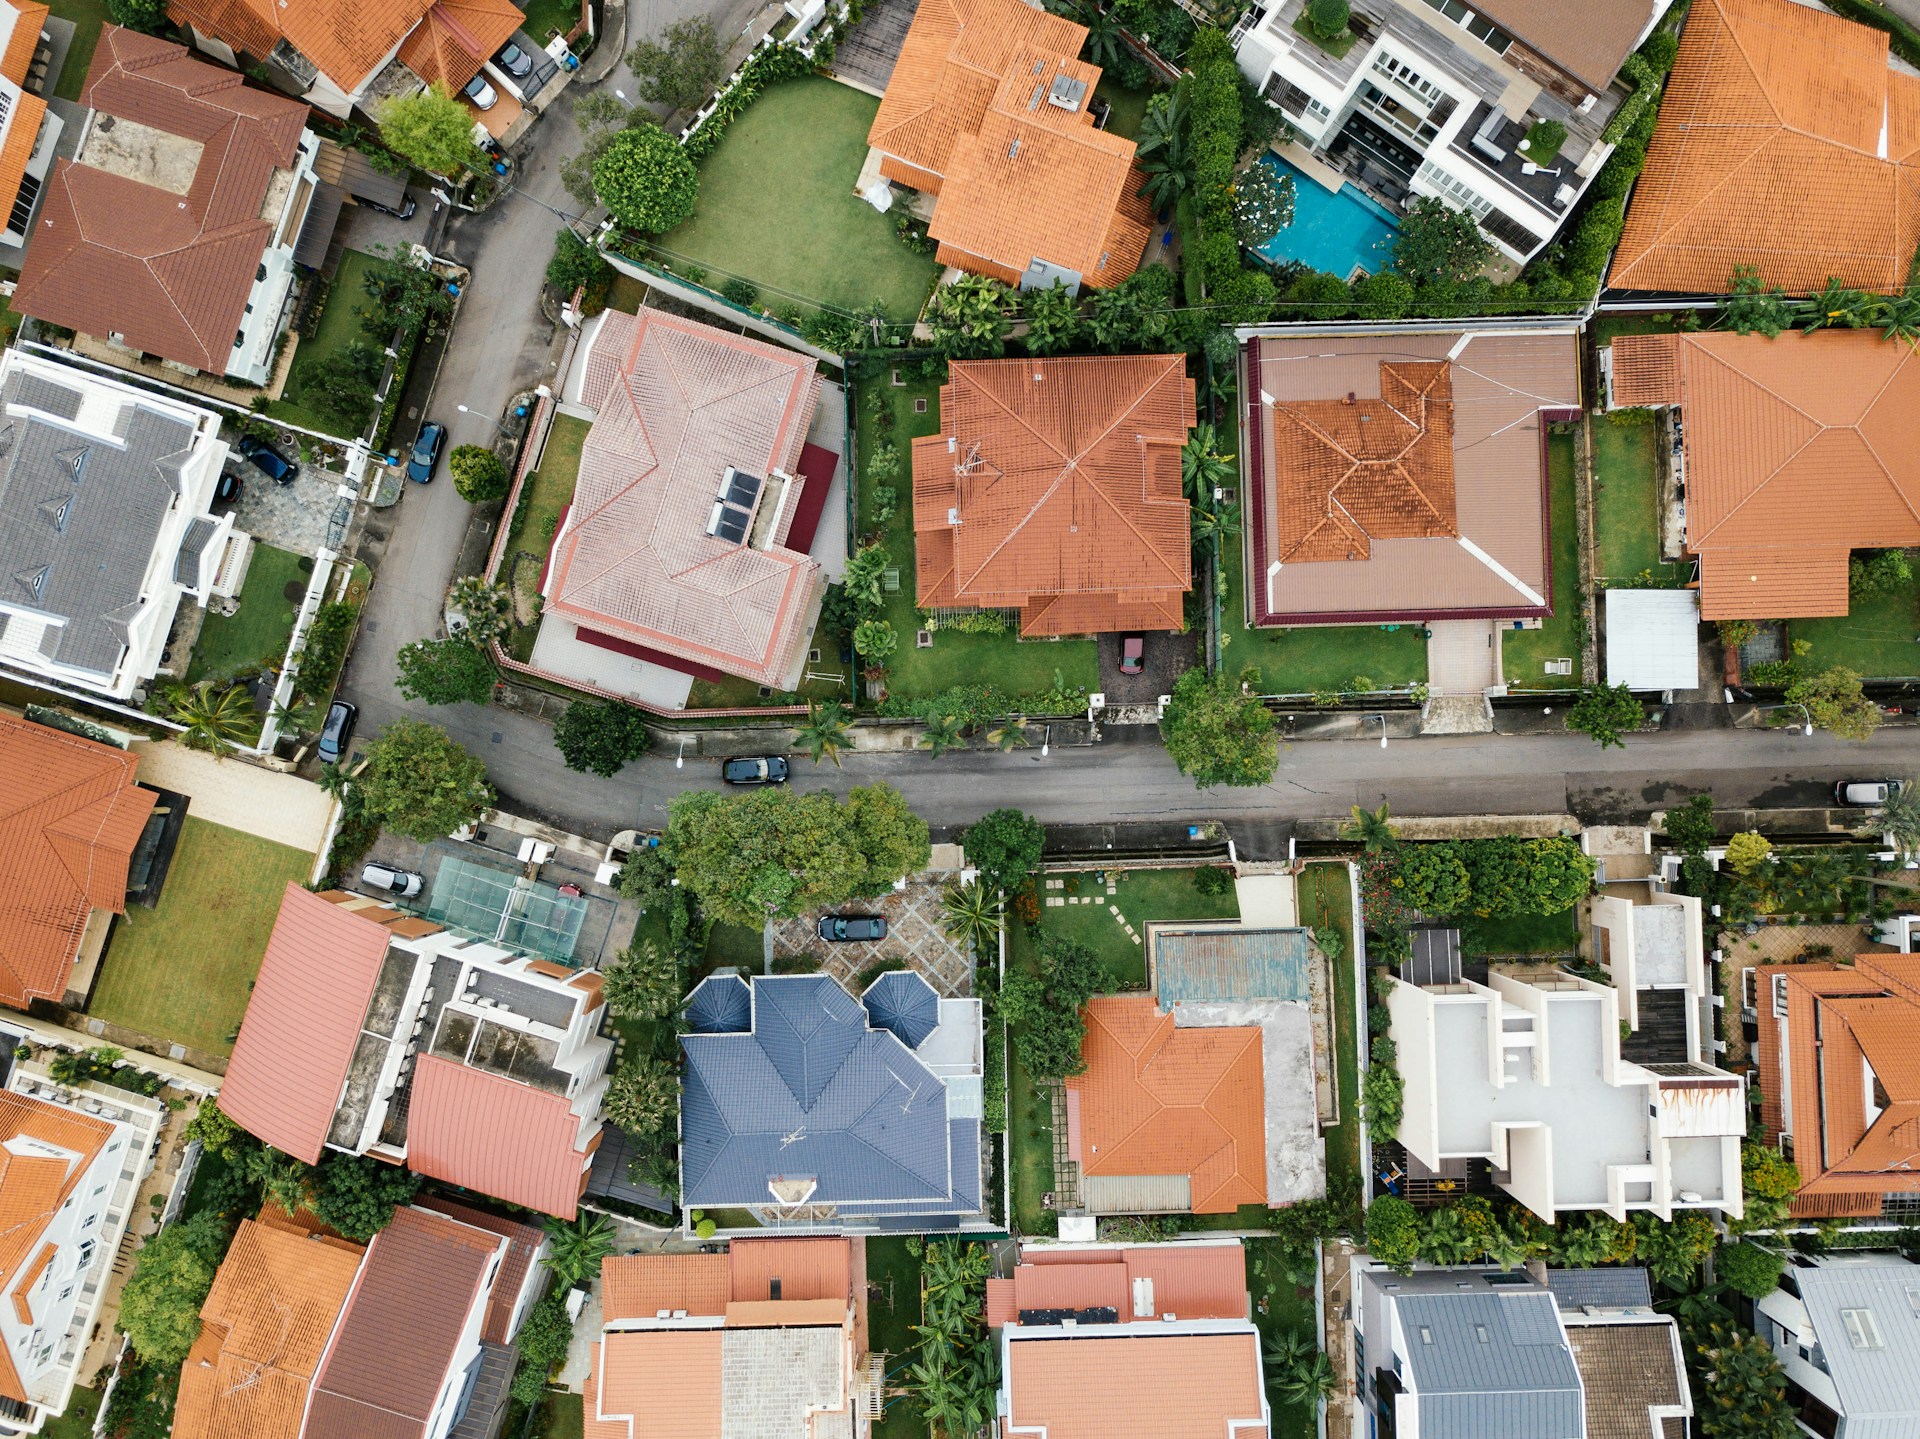 Arial view of houses